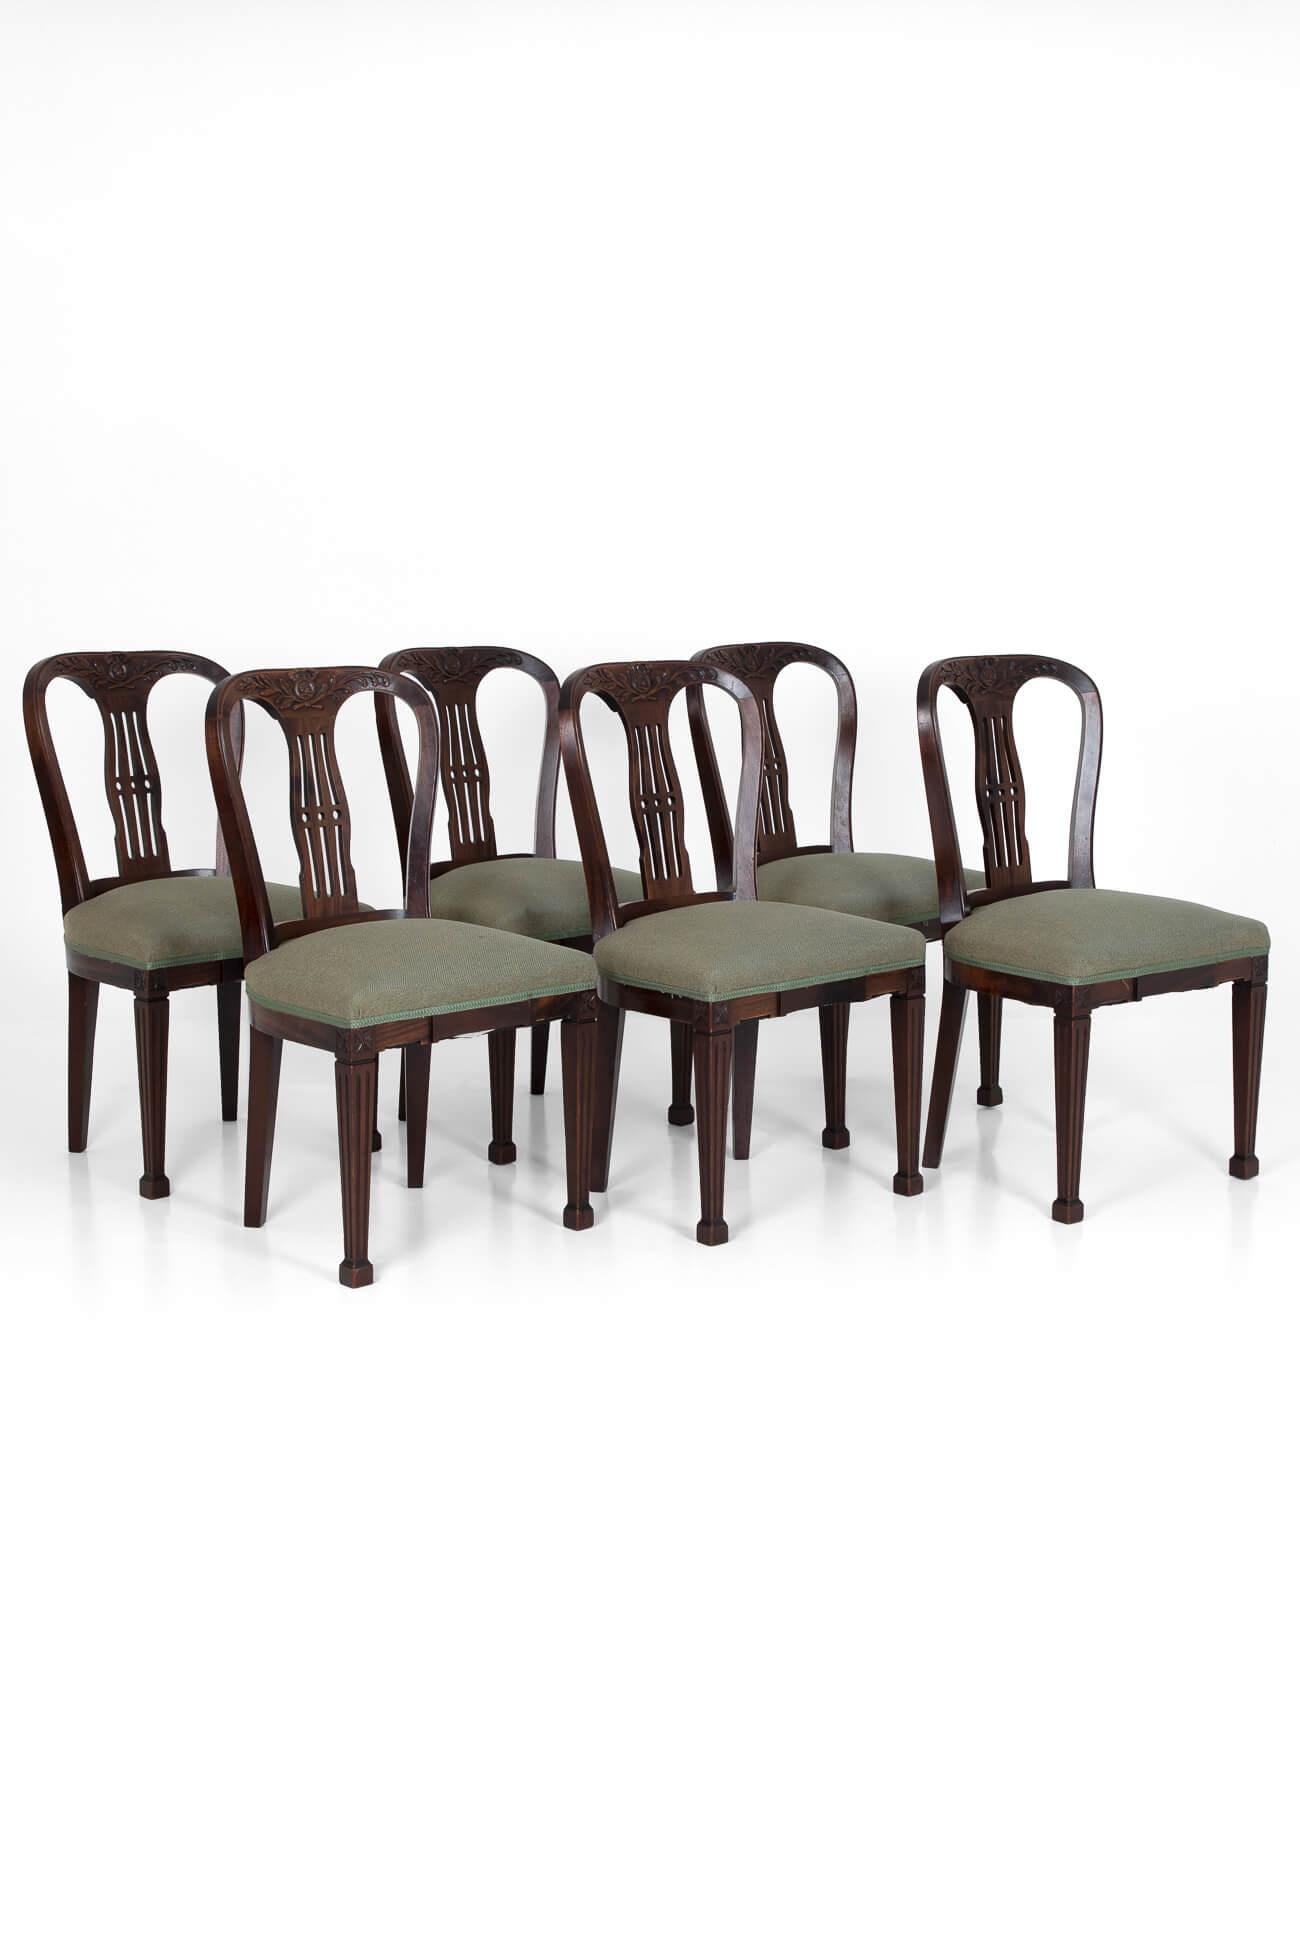 A set of six 19th century mahogany dining chairs from an English country house. In exceptional condition with classical motifs above fret cut backs and tapered legs on square feet. Fully restored with new calico and webbing, with seats reupholstered